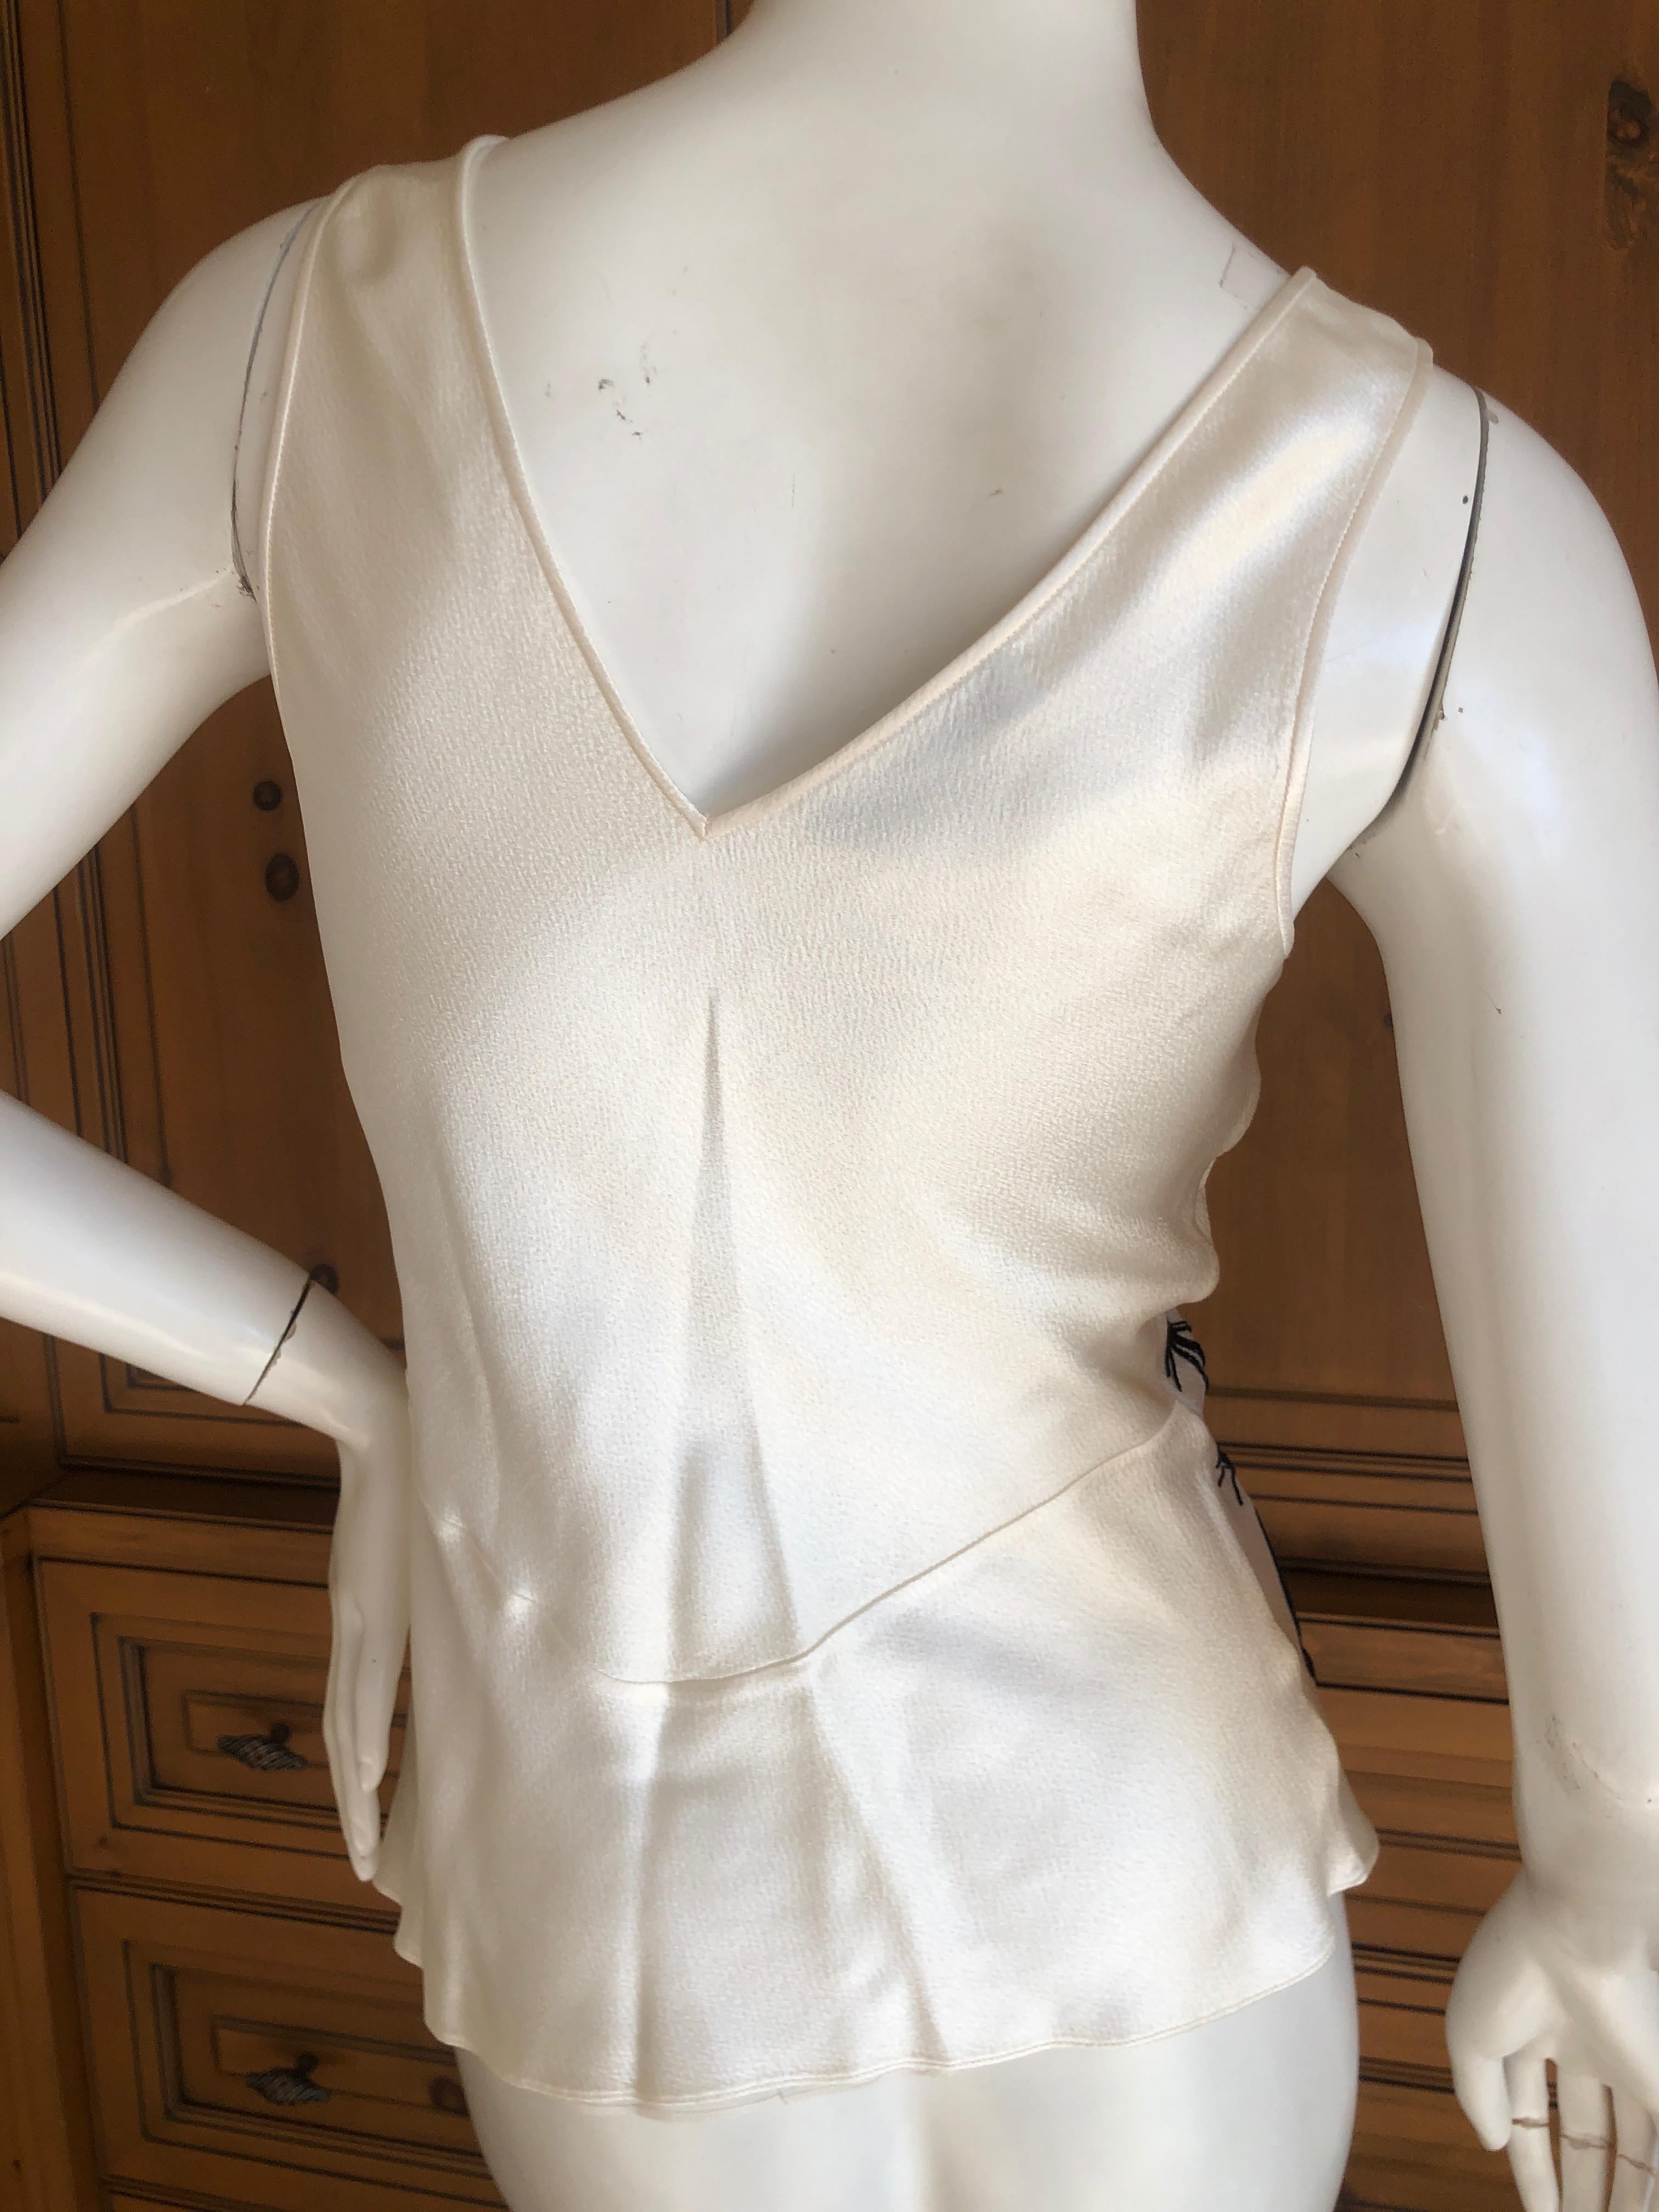 Christian Dior by Gianfranco Ferre '94 Hammered Silk Top w Lesage Floral Beading 4